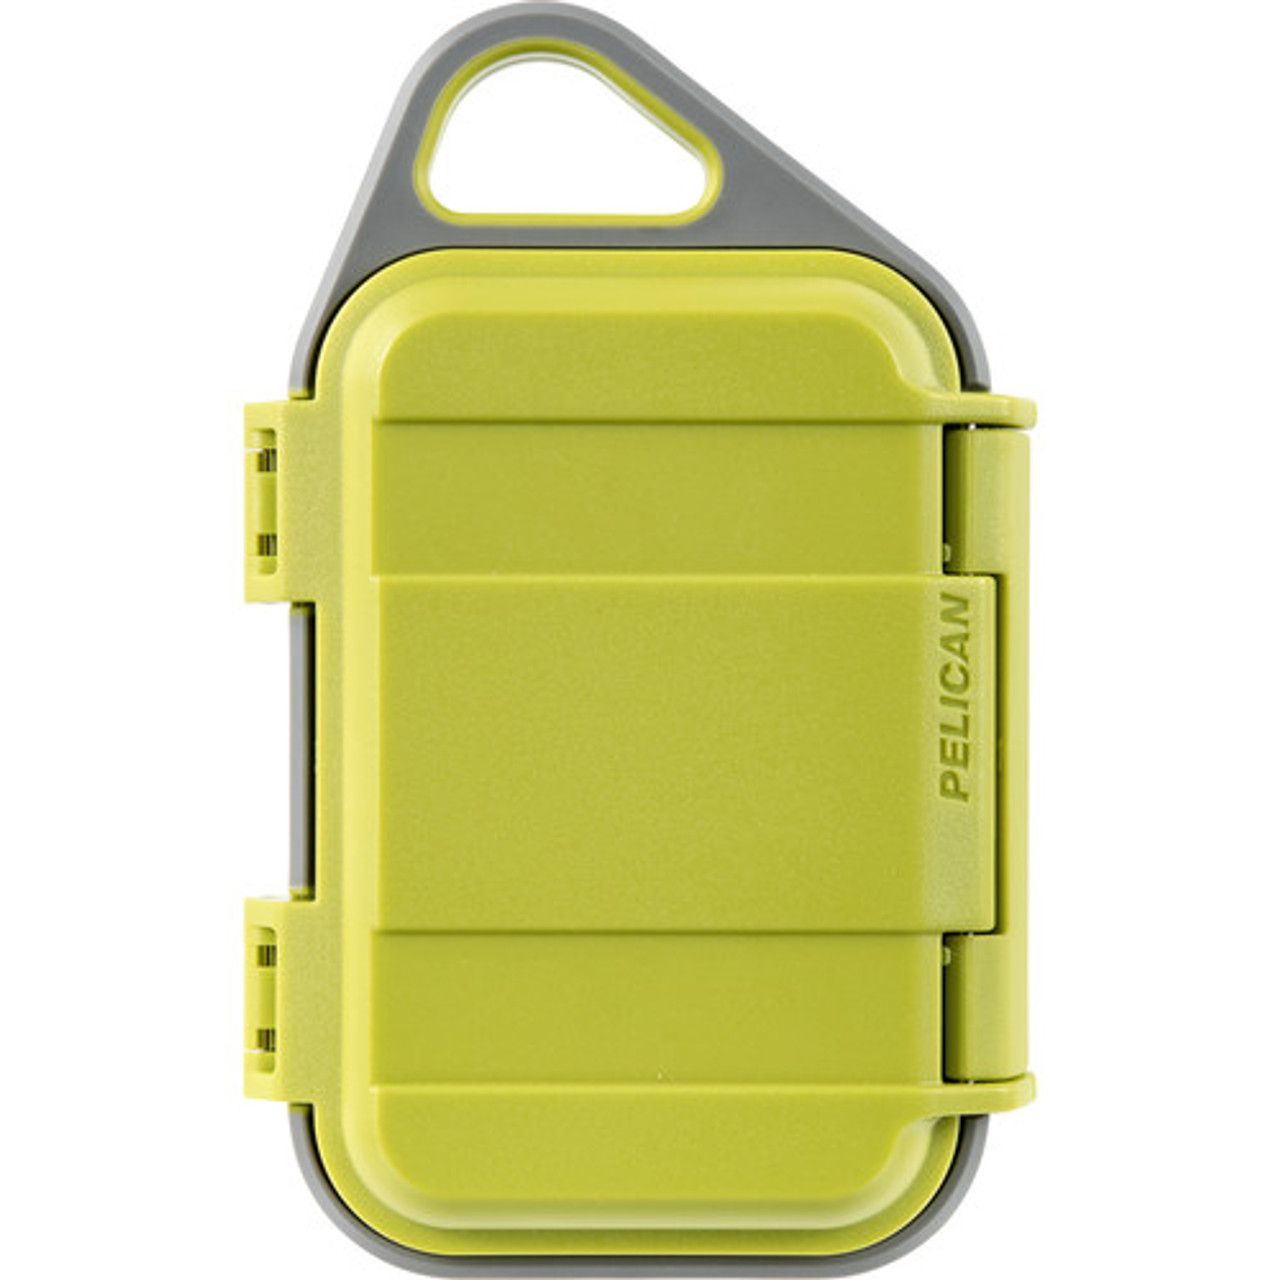 Pelican G10 Personal Utility Go Case (Lime/Gray) at